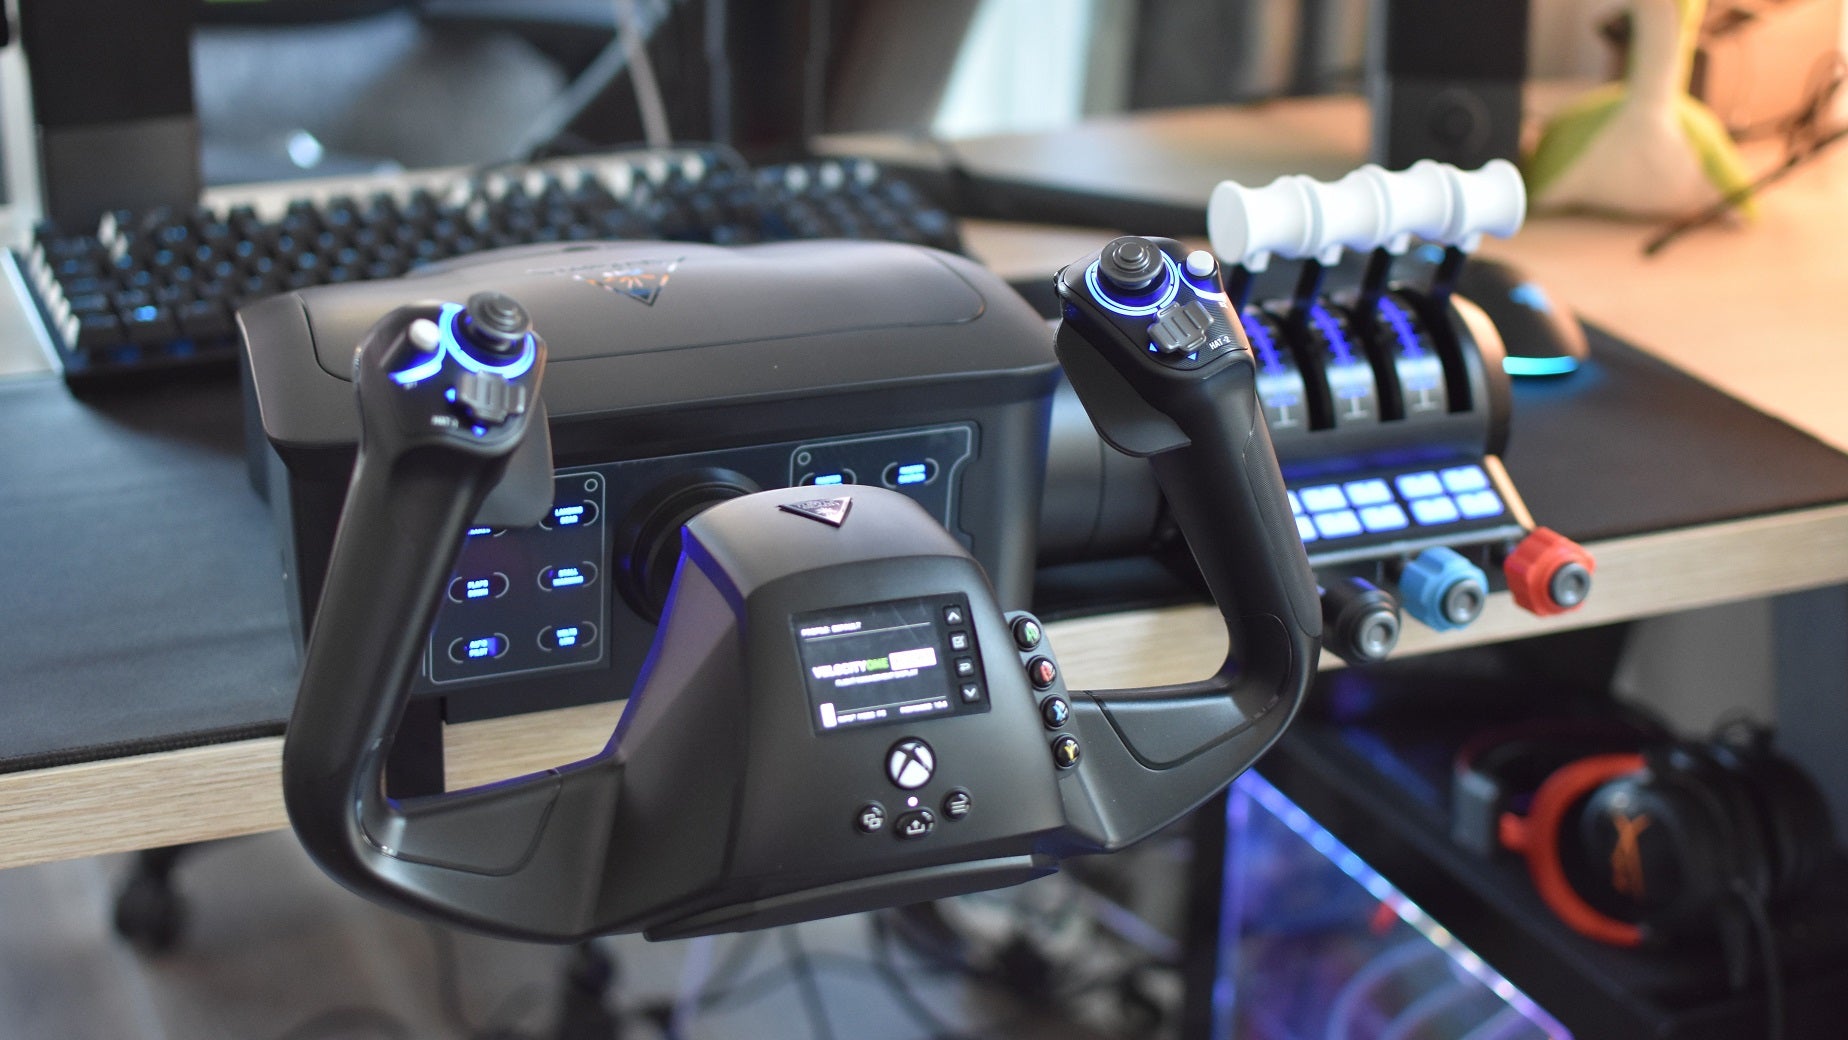 The Turtle Beach VelocityOne Flight yoke controller, powered up and affixed to a desk.